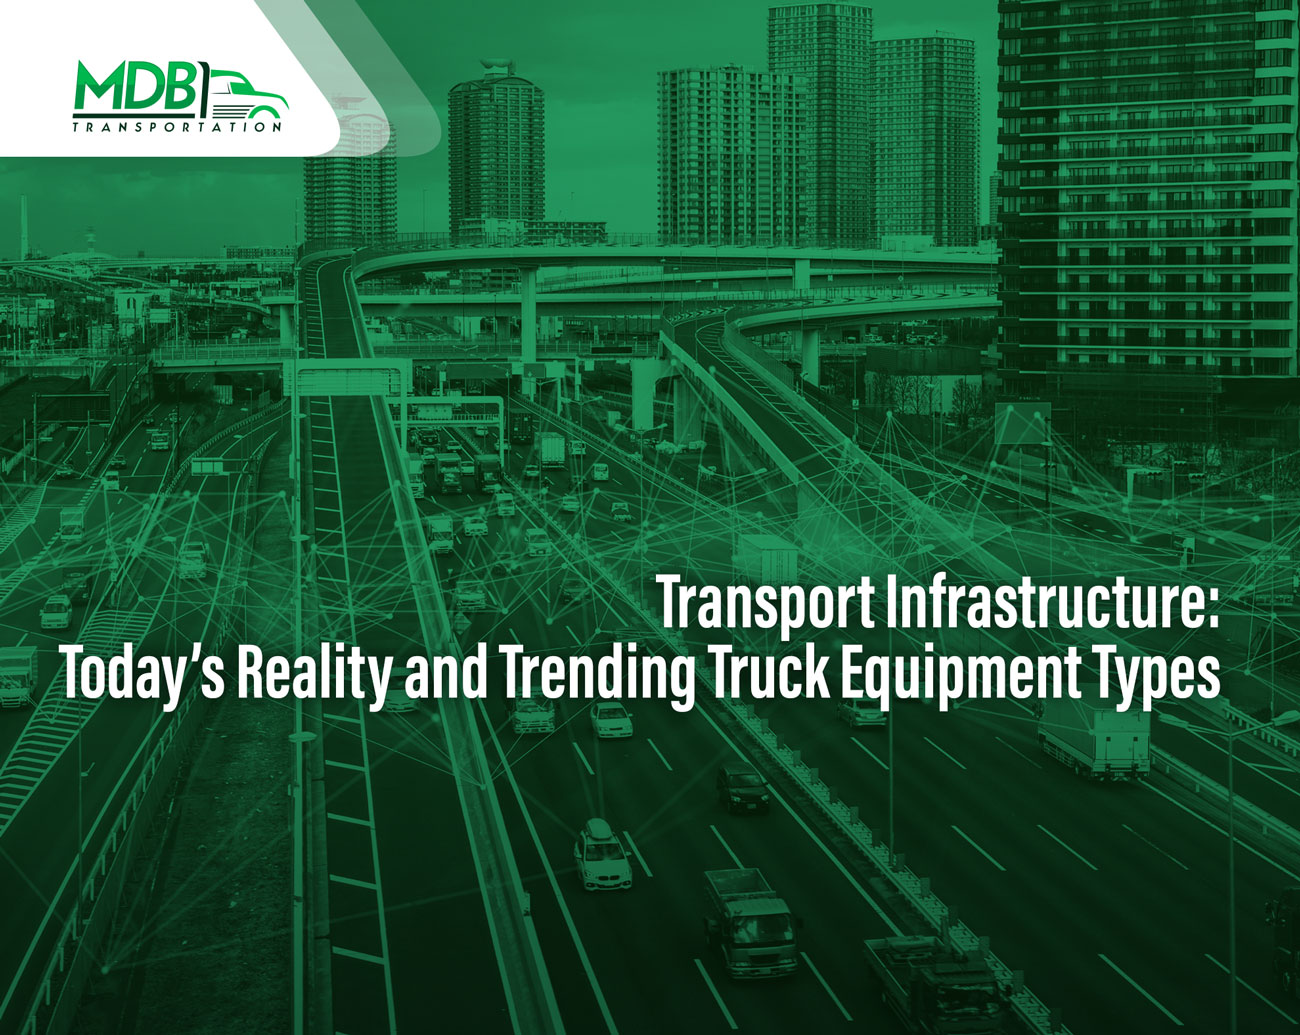 Transport Infrastructure: Today’s Reality and Trending Truck Equipment Types